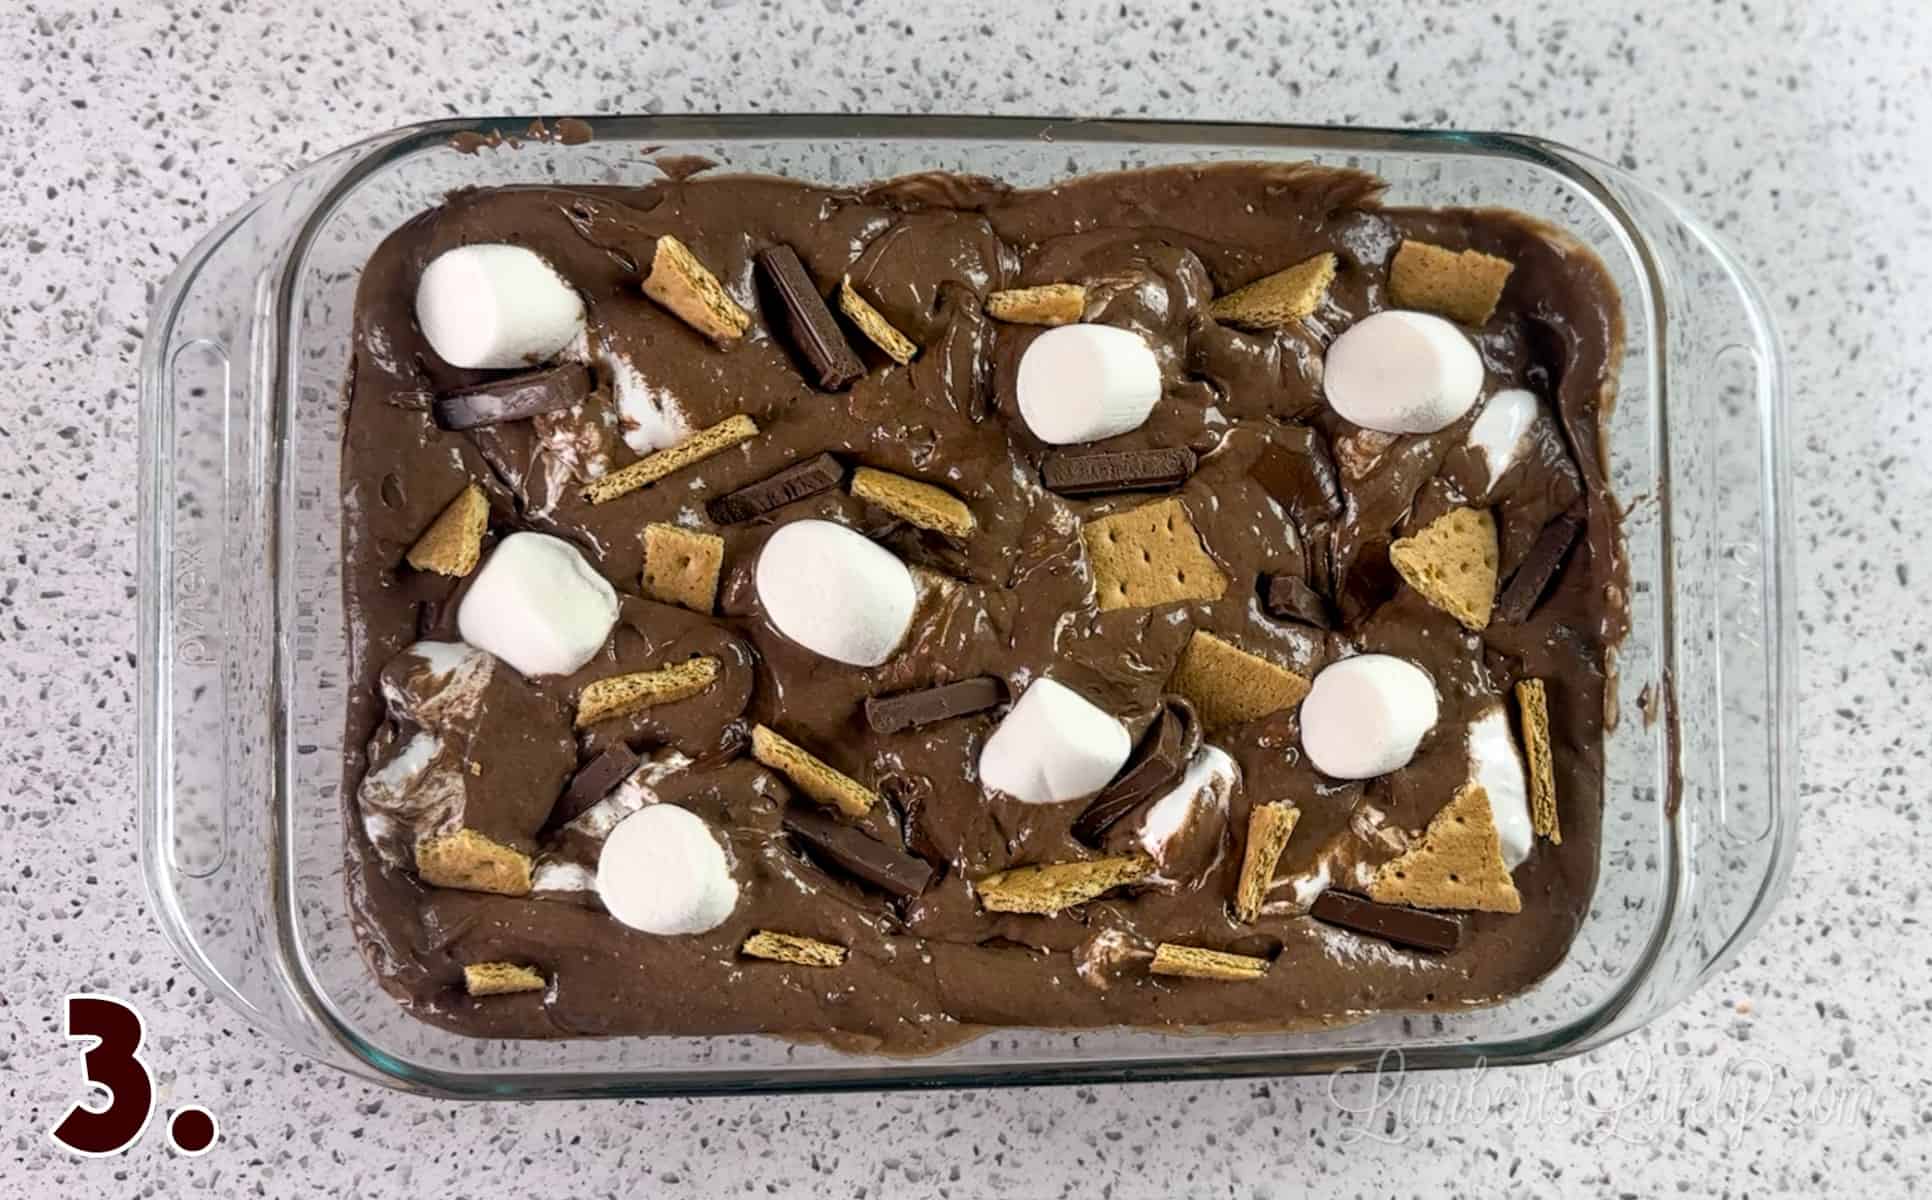 marshmallows, graham crackers, and chocolate bars pressed into cake batter mixture.